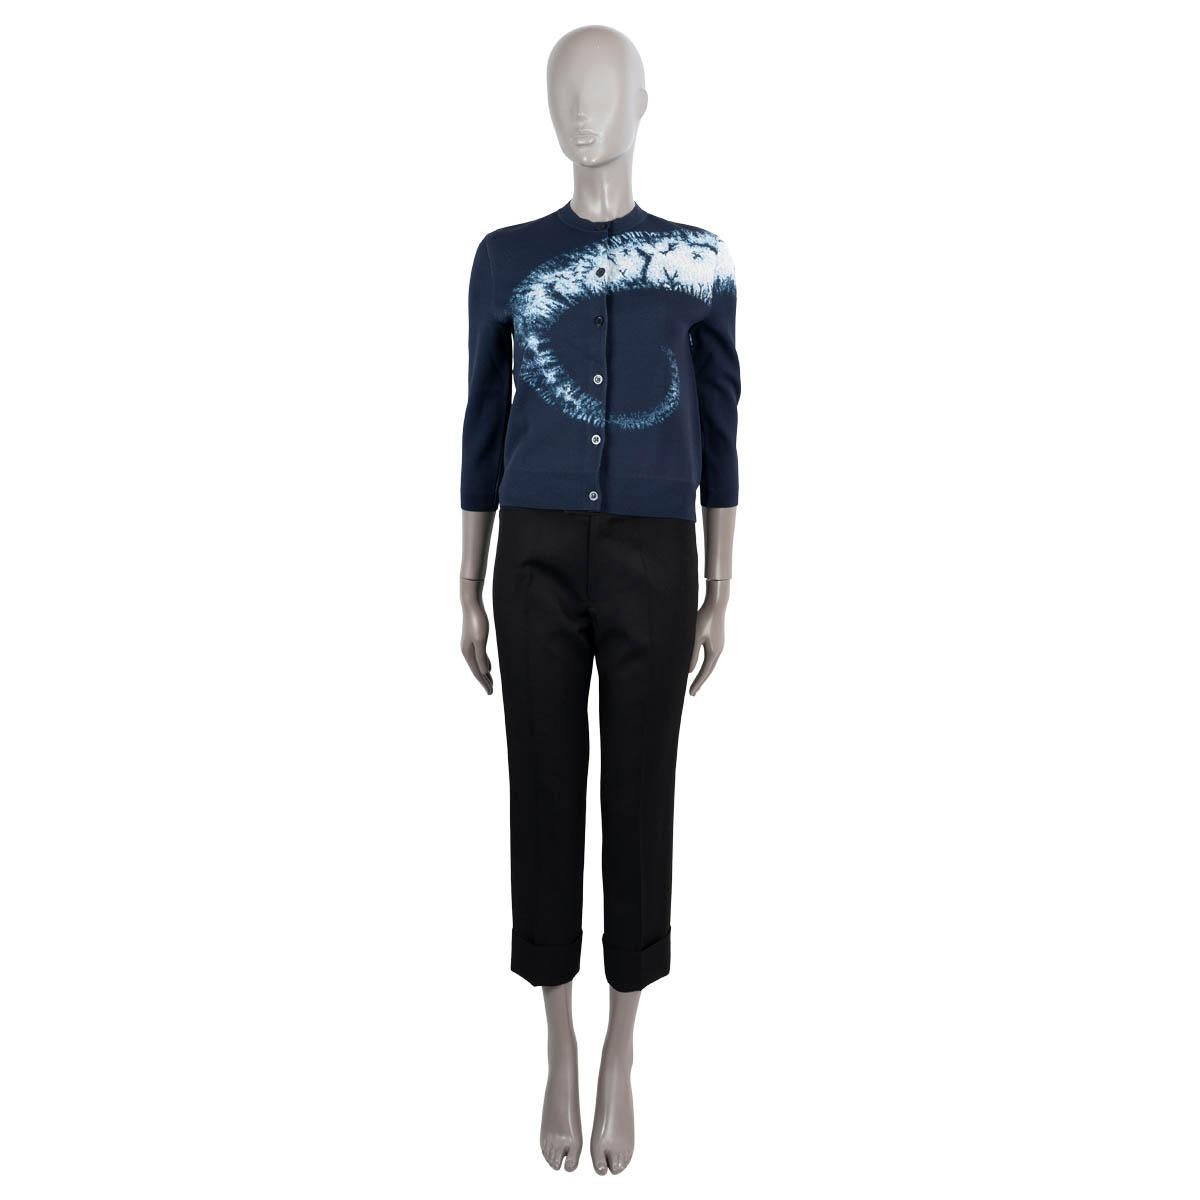 100% authentic Christian Dior tie-dye cardigan in navy blue and white viscose (82%), elastane (16%) and nylon (2%). Features a rib-knit hem and cuffs. Closes with buttons on the front. Unlined. Has been worn and is in excellent condition.

2020